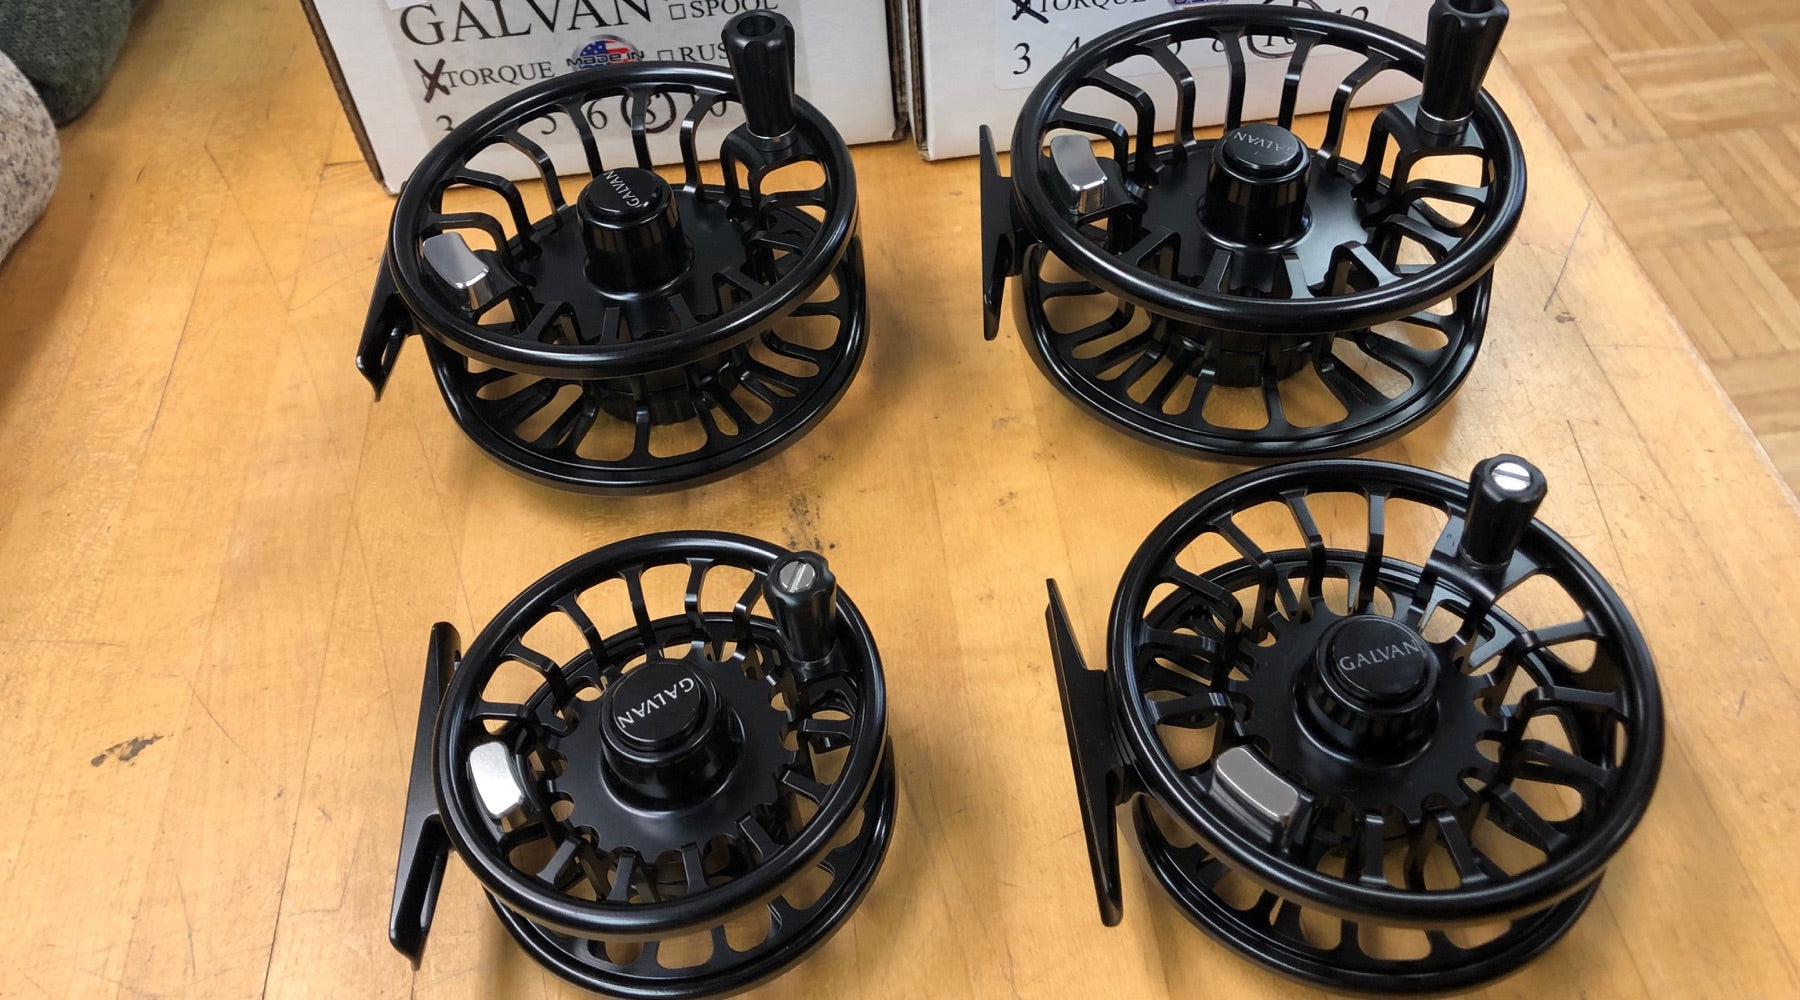 Gear Review: The Galvan Torque Fly Reel - The Compleat Angler